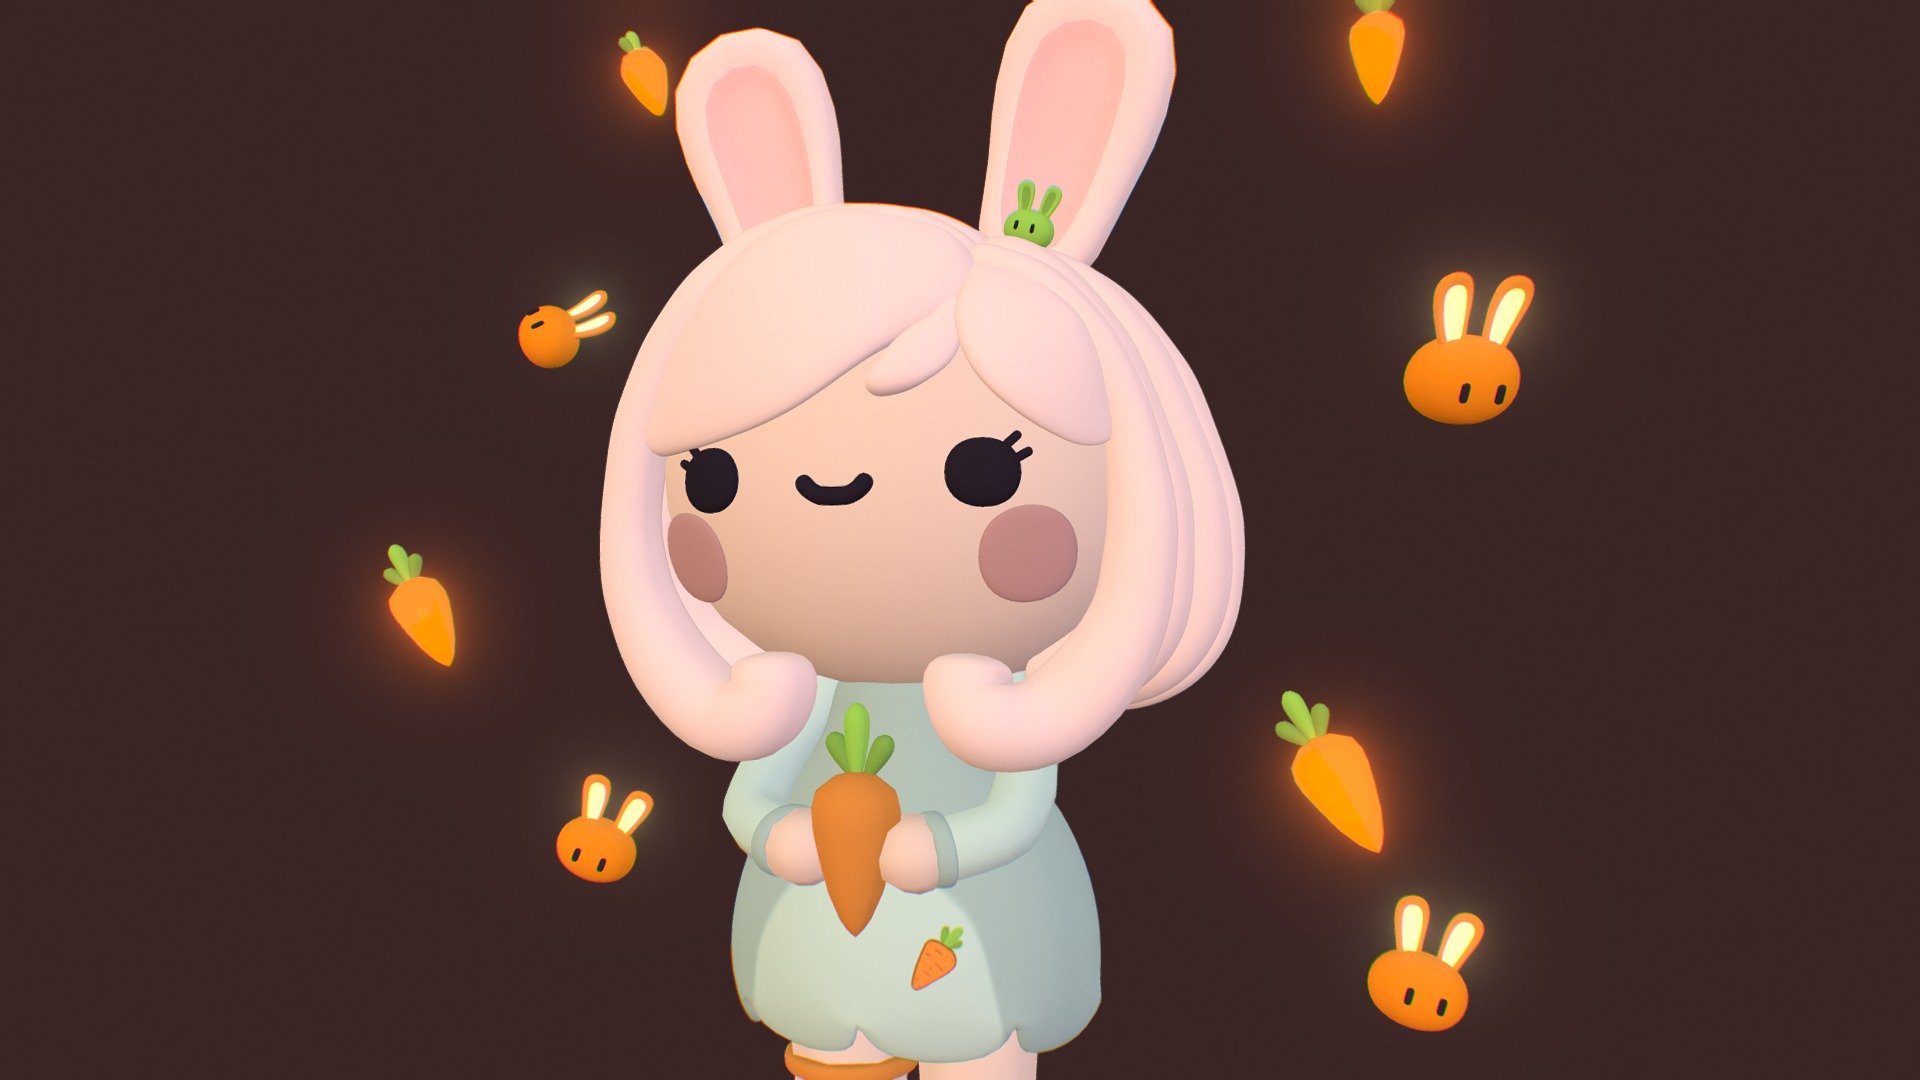 After a long time without posting anything I came back with this super cute model that I did as the final project for the Yasmin Isla course (Creating Kawaii Characters in Blender). I'm really happy with the result even though I can't do a good lighting on the model here on skethfab. If you want to see the result of lighting in Blender I will post it on my twitter (@bunnymari_)!
The model was initially inspired by a photo of me but I was changing some items, such as clothing and accessories.
 (づ｡◕‿‿◕｡)づ - The Usagi - 3D model by Marinna Damaso (@bunnymari) 3d model